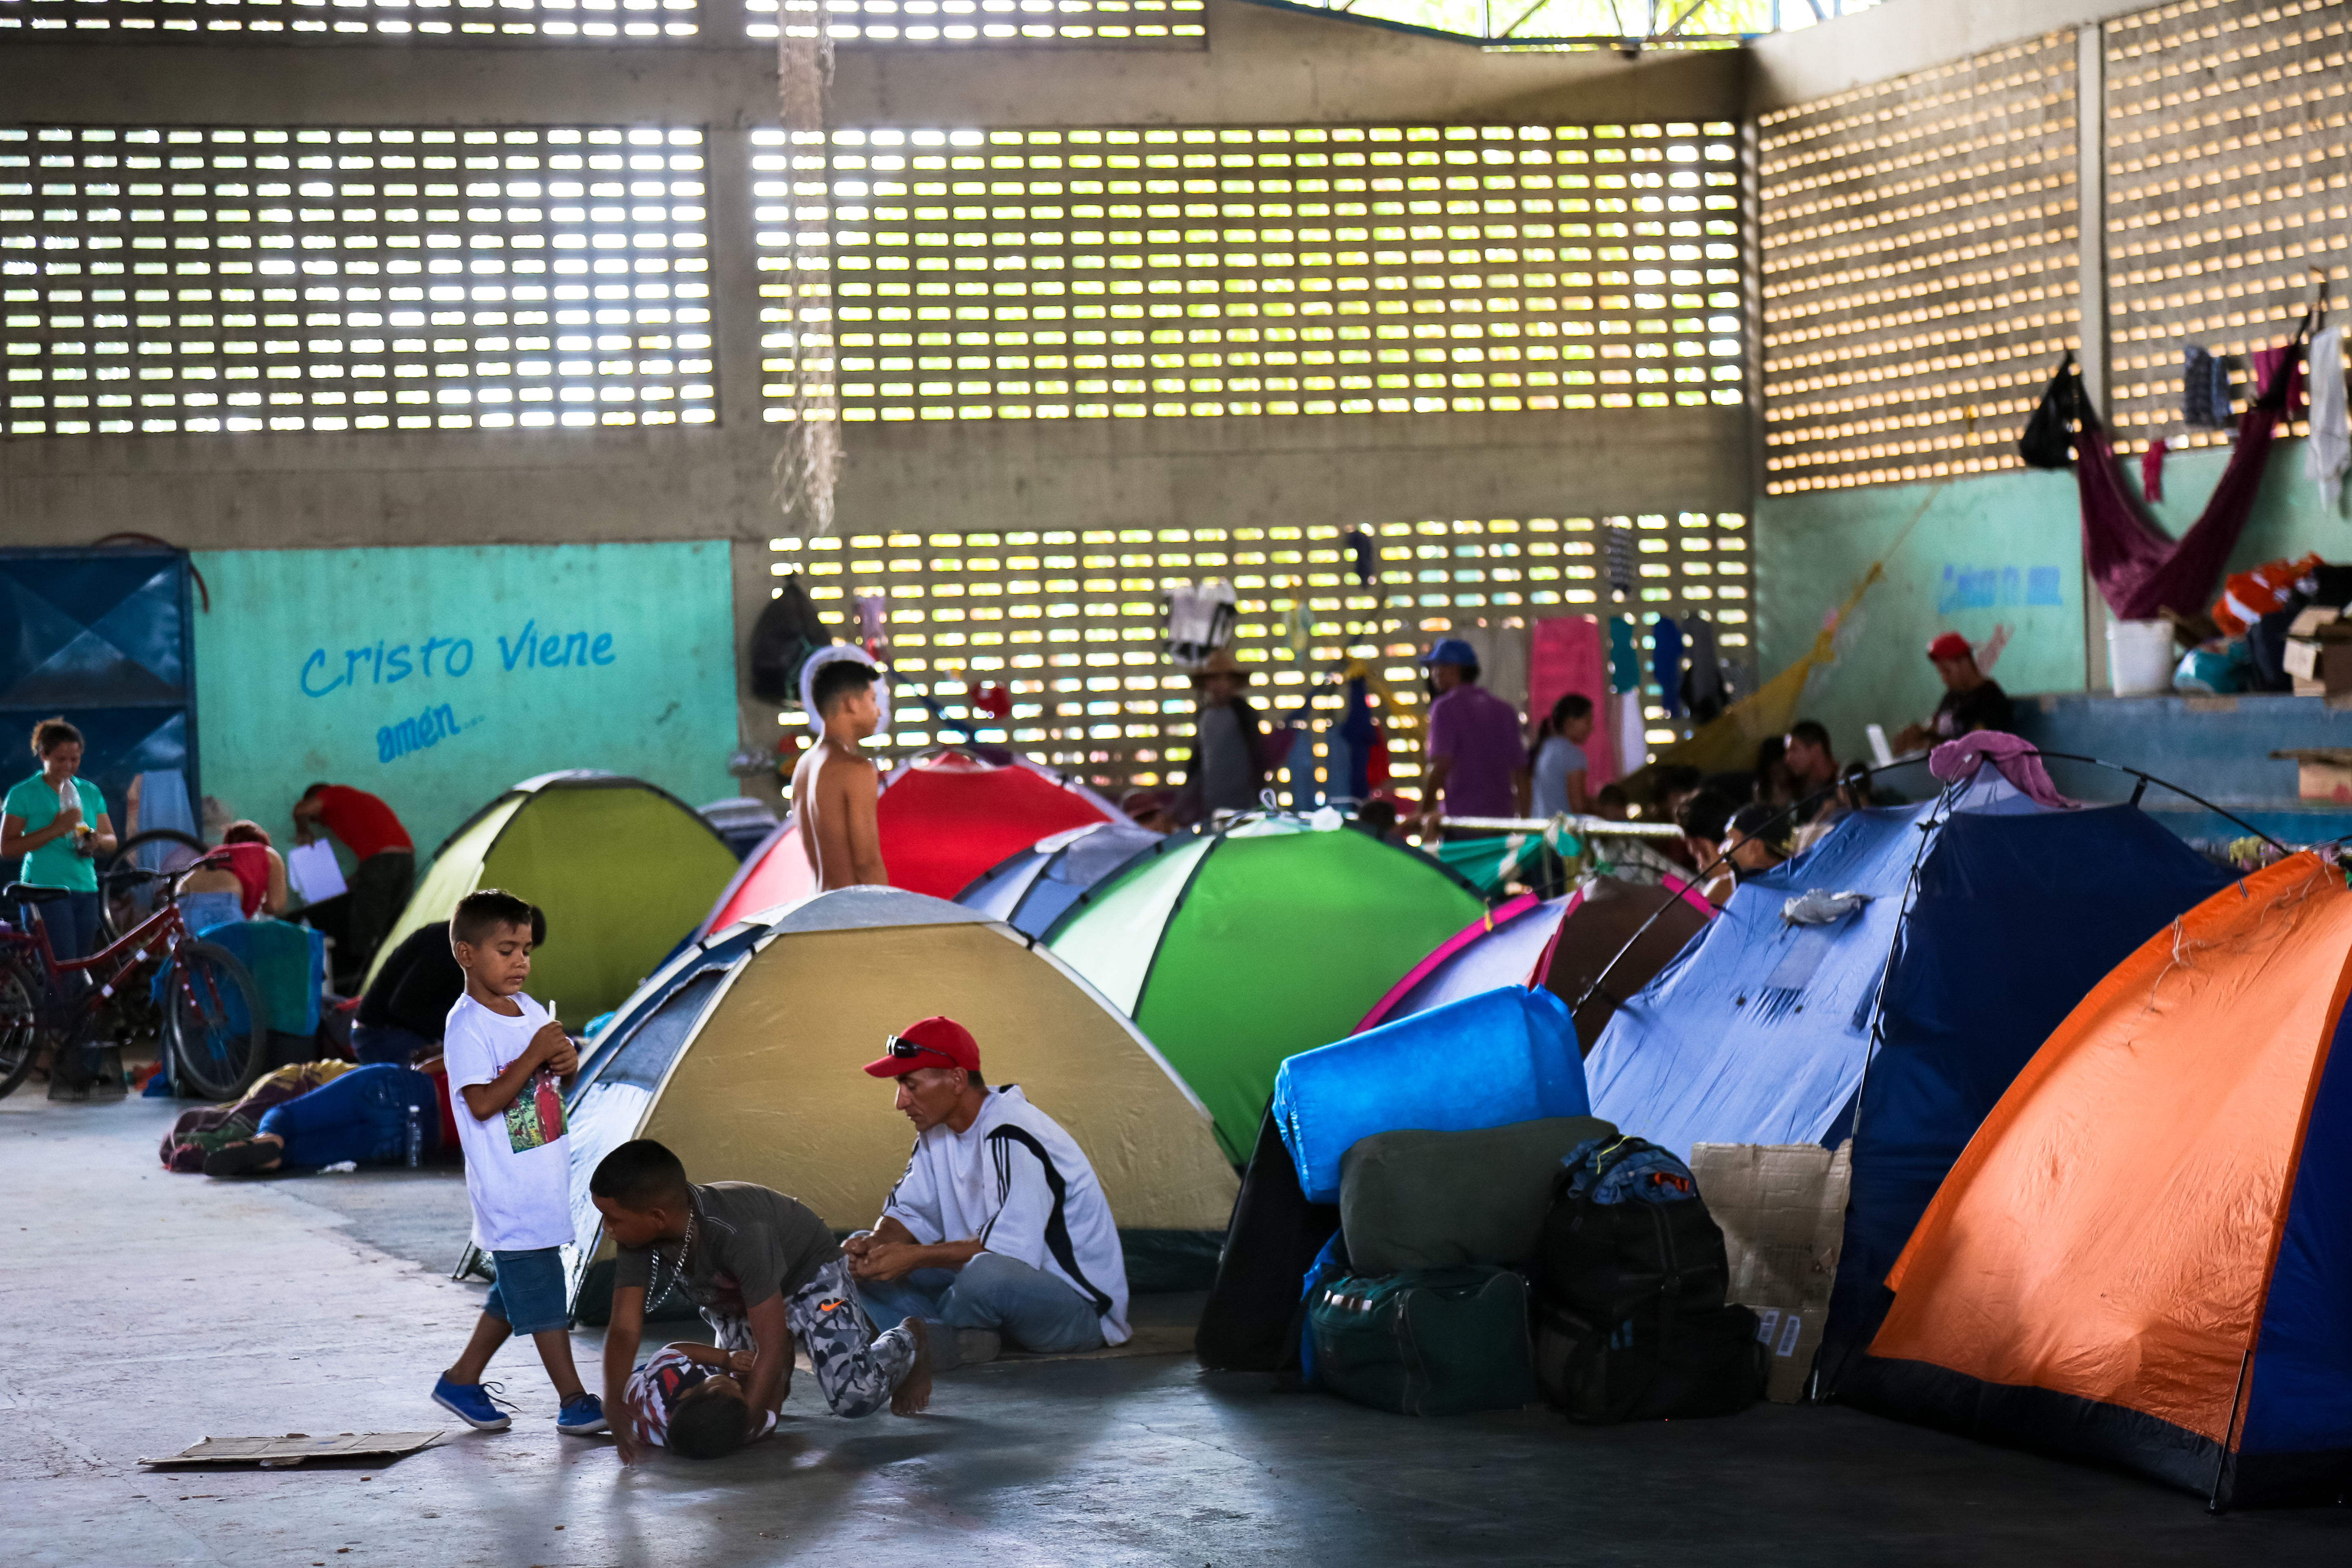 Tancredo Neves shelter, in Boa Vista (RR), where hundreds of non-indigenous Venezuelan migrants are being housed. People sleep in tents or hammocks. The exterior of the shelter is also occupied by stalls, many of them improvised.